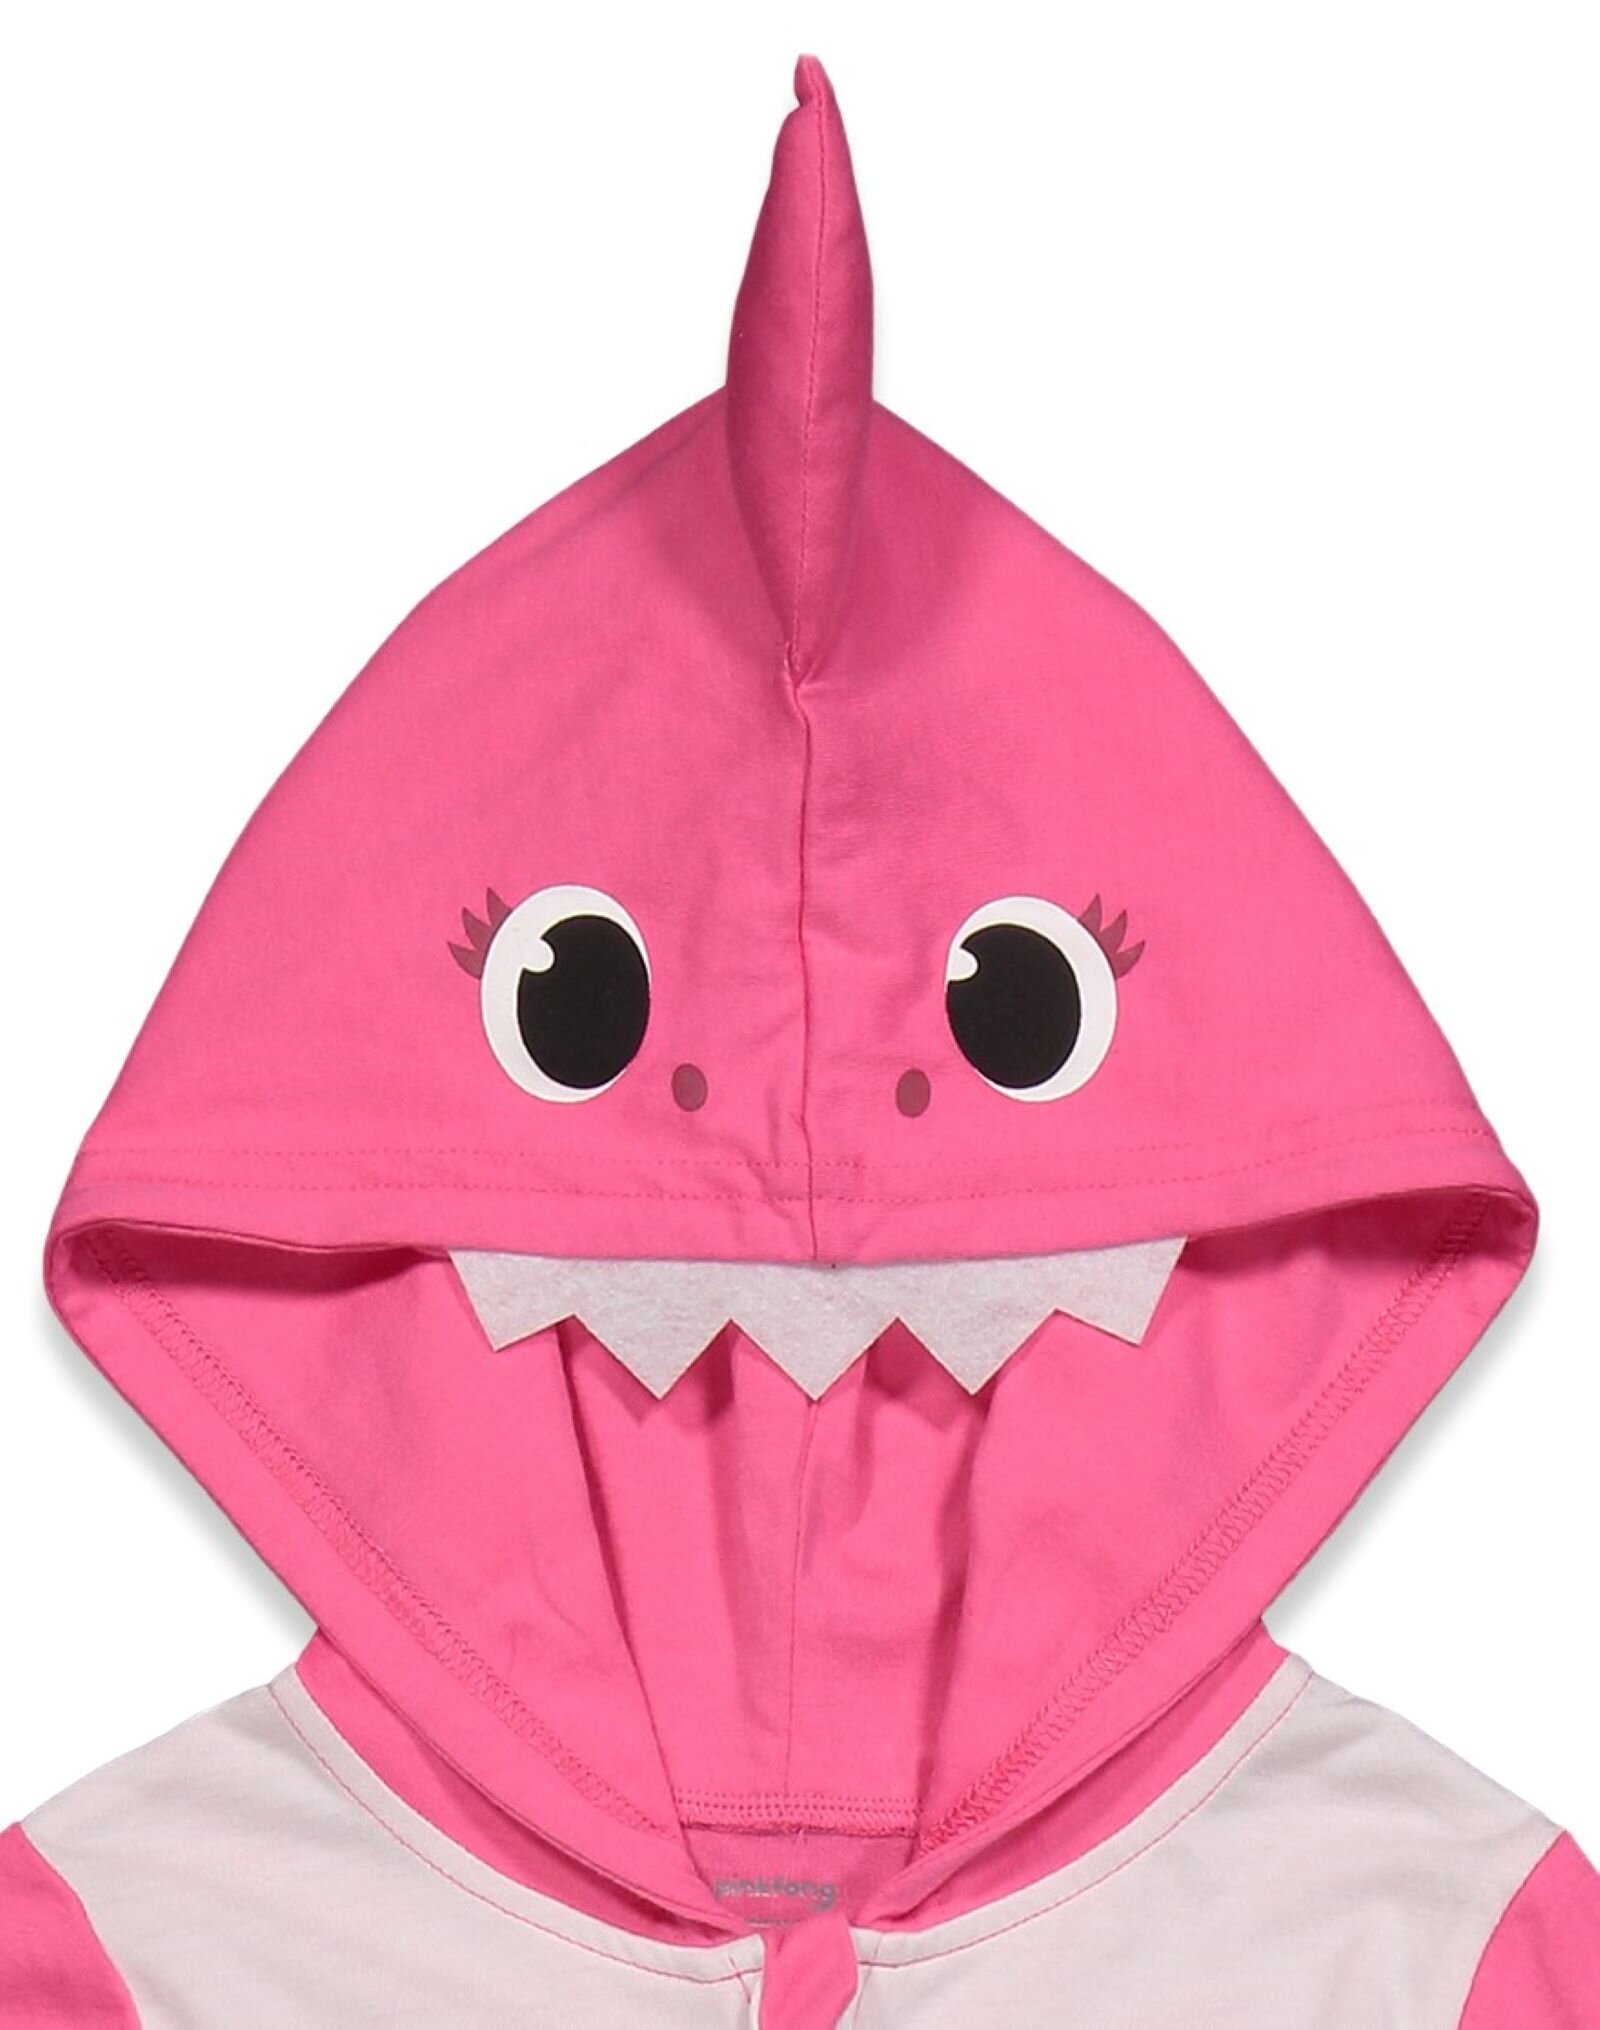 Pinkfong Baby Shark Infant Baby Girls Zip Up Costume Coverall Newborn to Little Kid - image 3 of 5